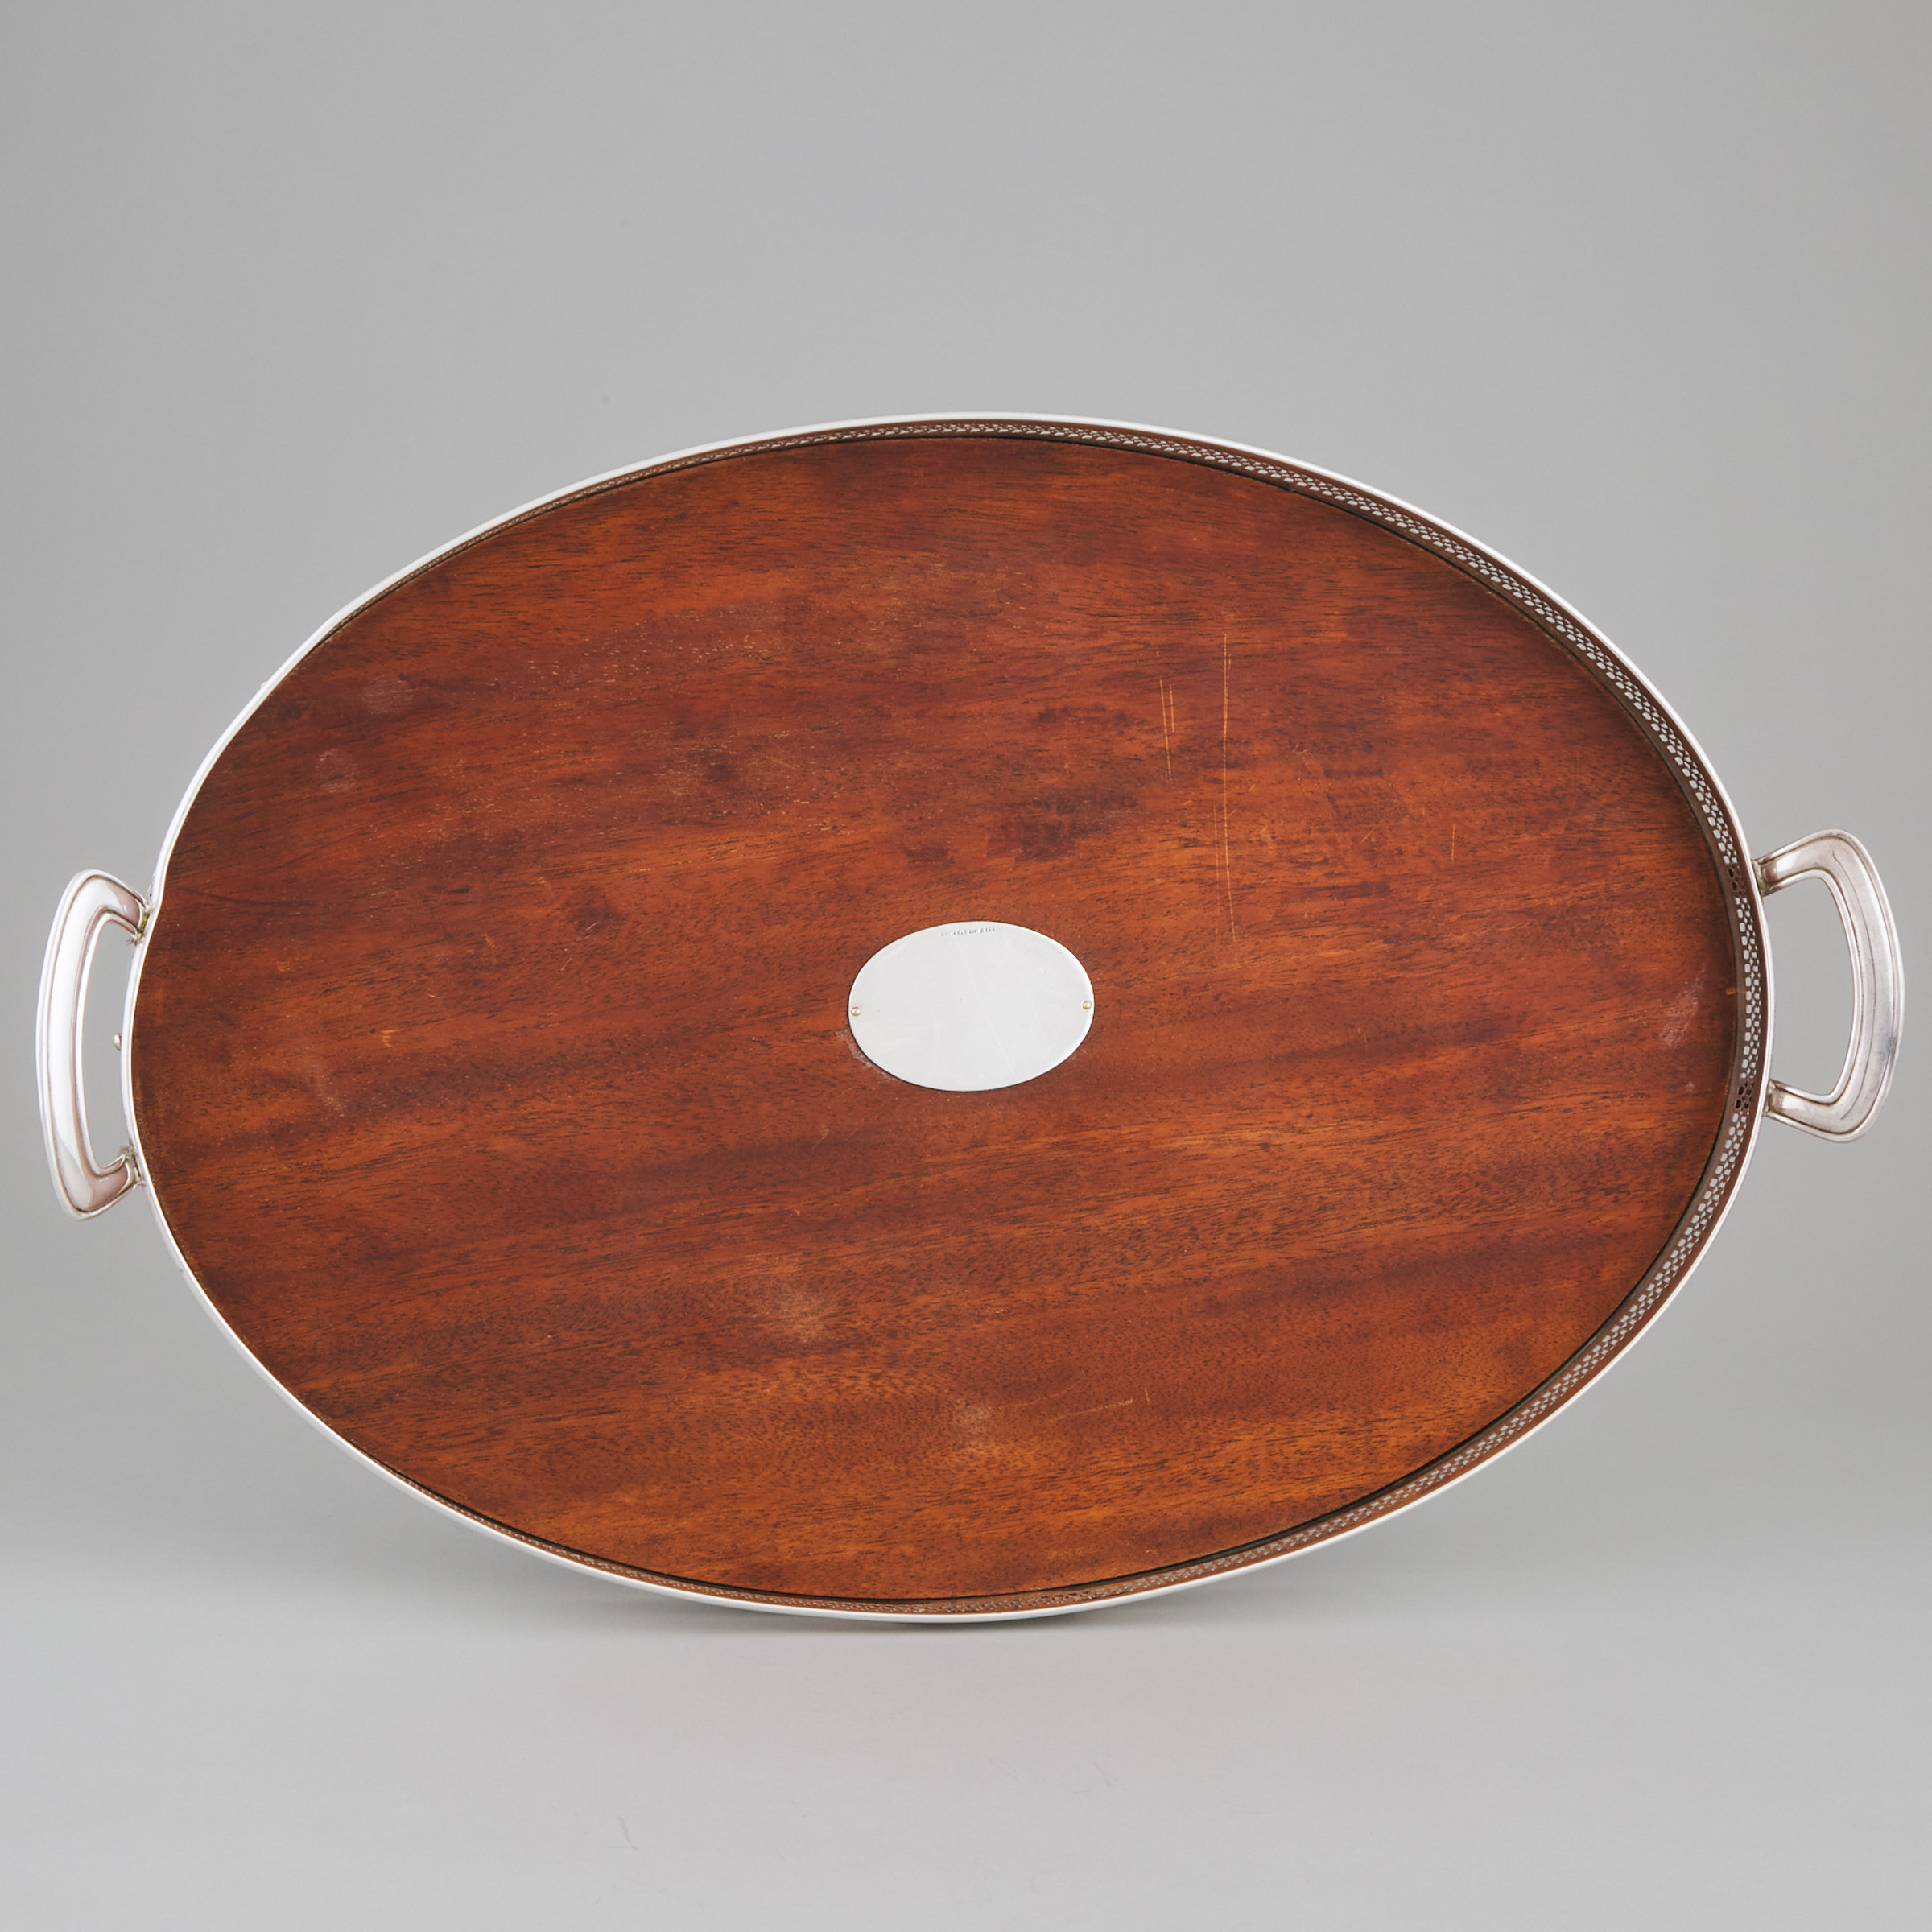 Canadian Silver Mounted Mahogany Oval Serving Tray, Roden Bros., Toronto. Ont., early 20th century